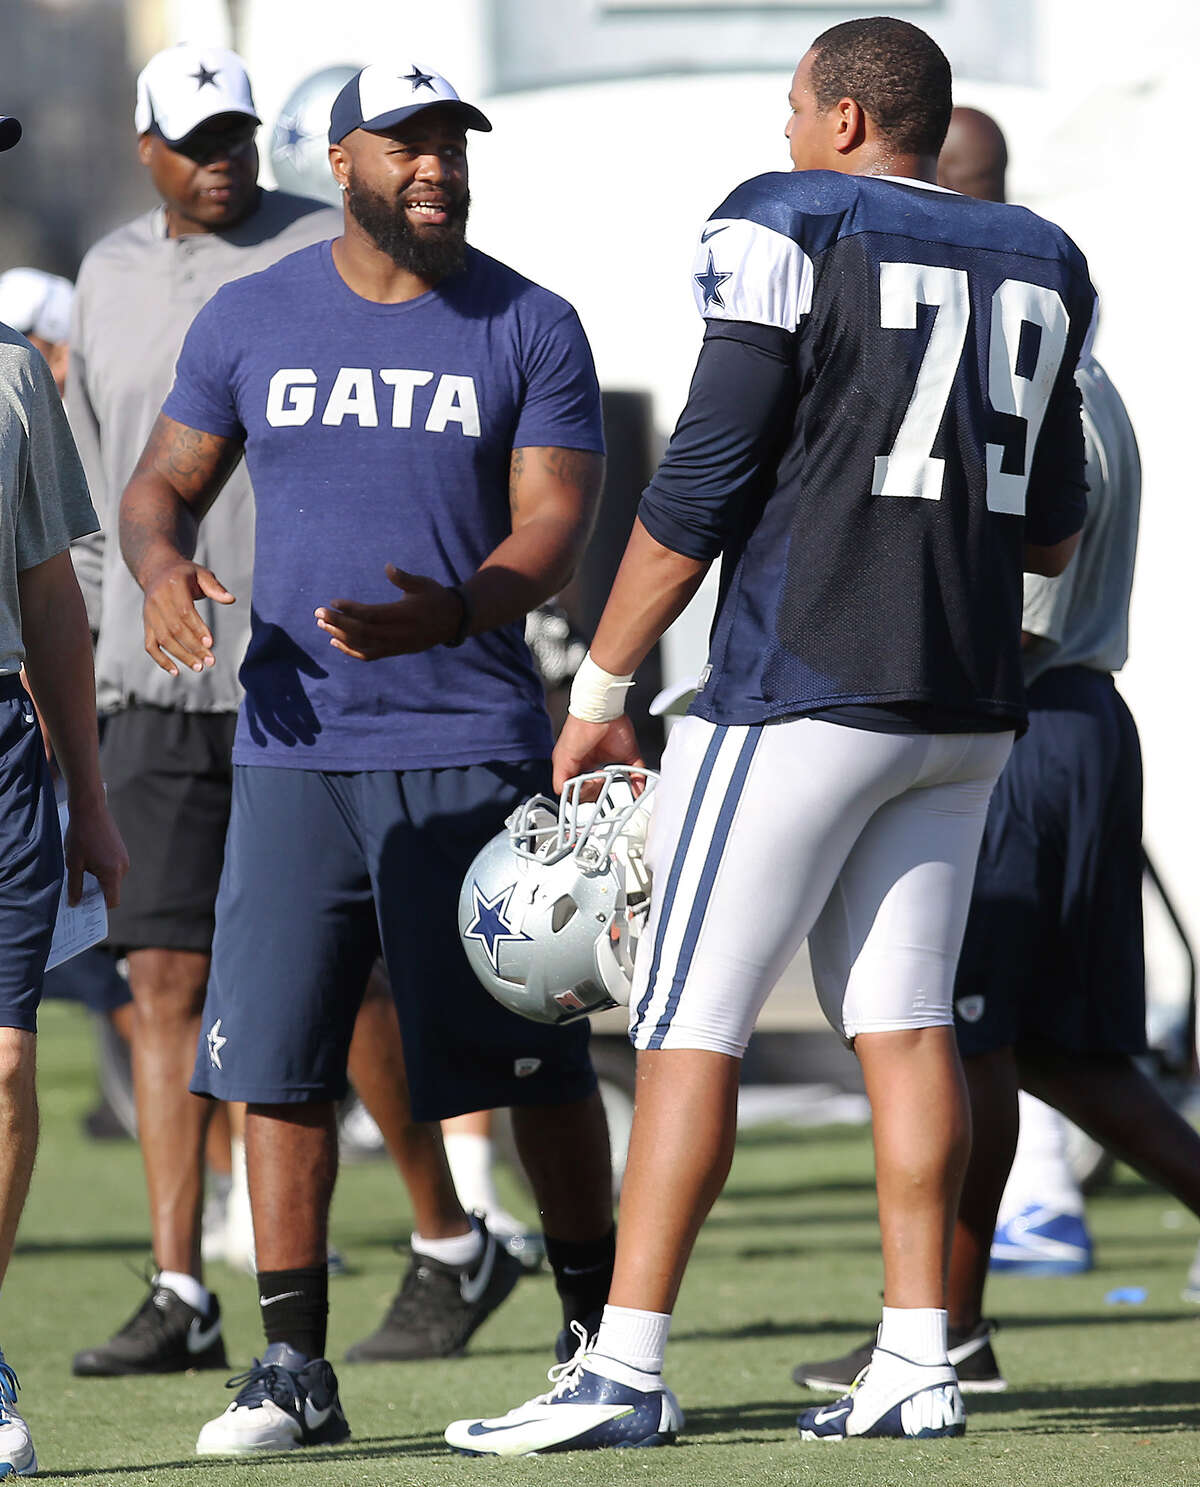 Injured defensive end Anthony Spencer (center) offers help to fellow player Ben Bass (79) during the afternoon session of the 2013 Dallas Cowboys training camp on Tuesday, July 23, 2013 in Oxnard.